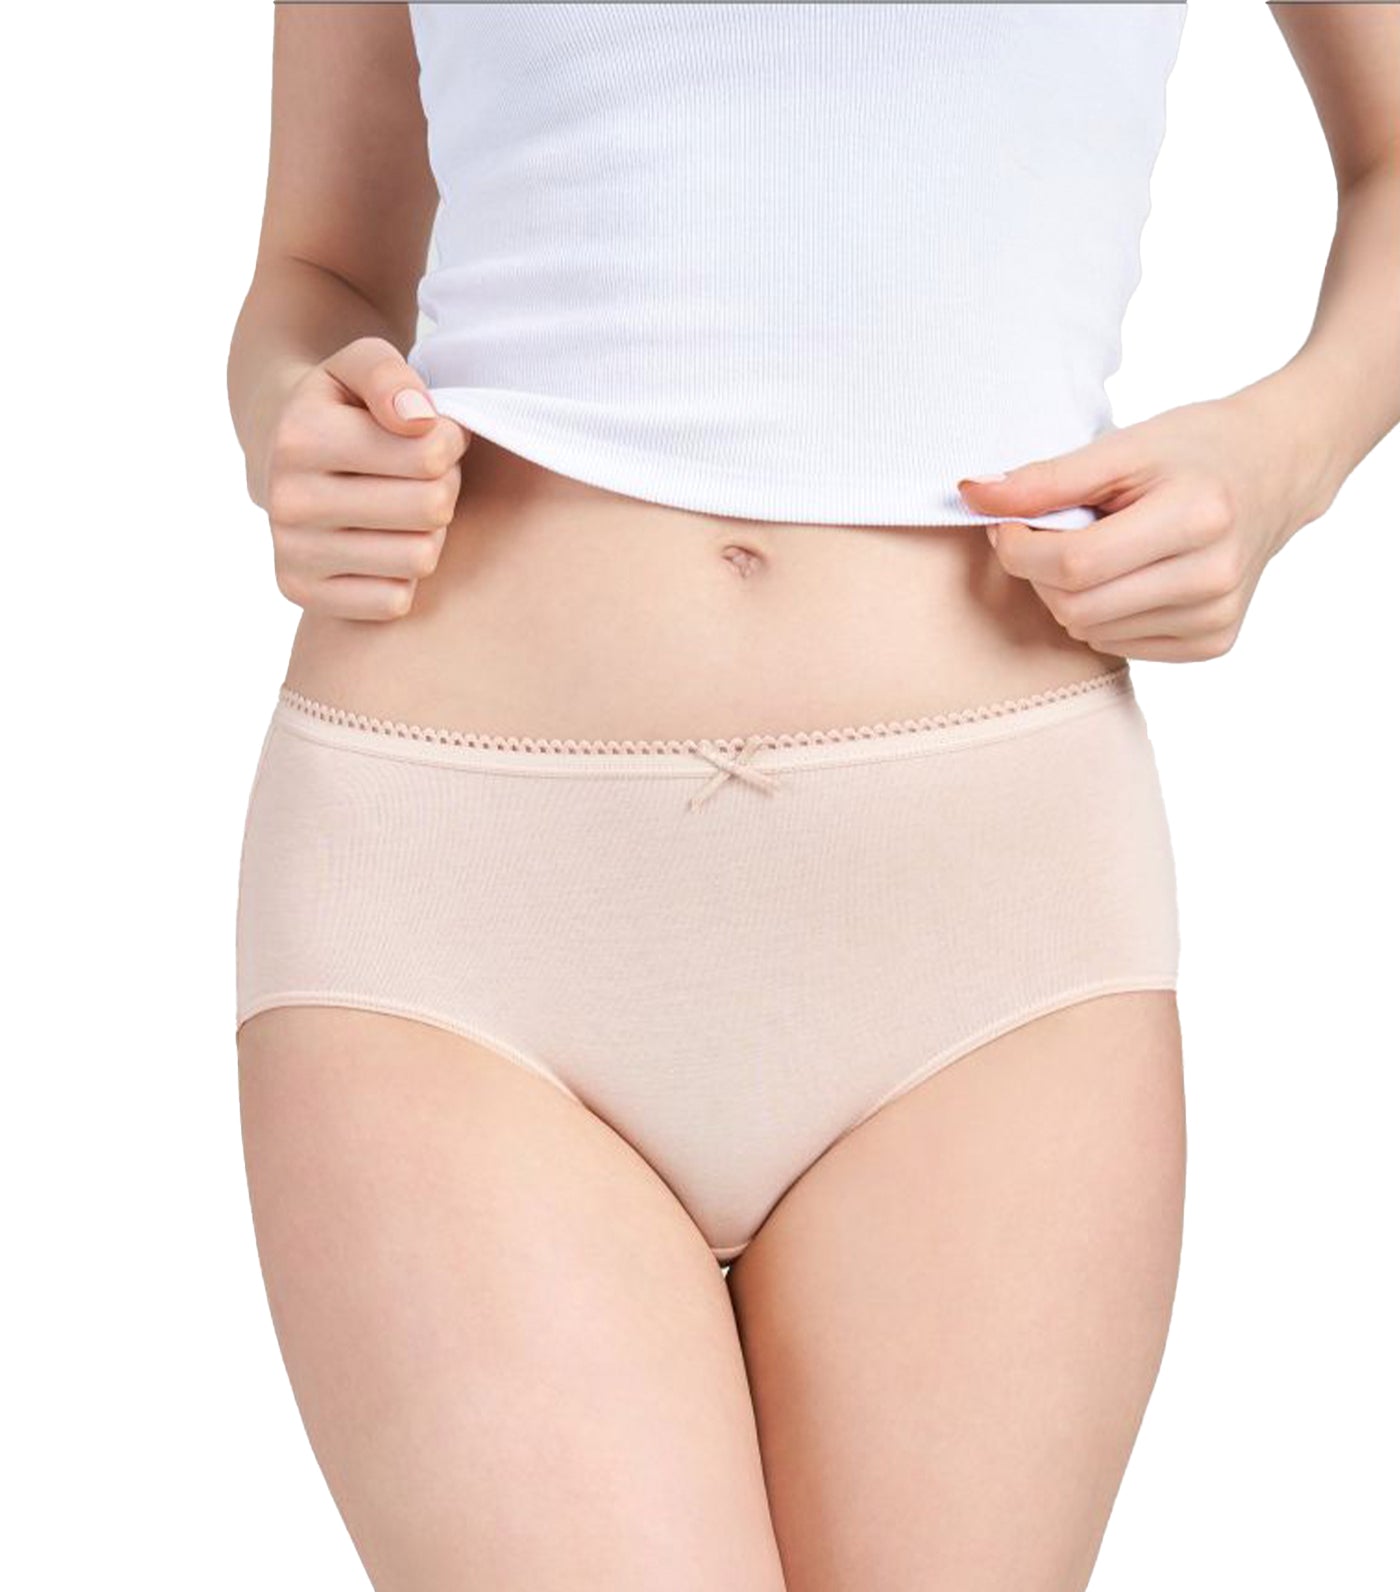 Buy Triumph Medium Rise Full Coverage Hipster Panty - Woodrose at